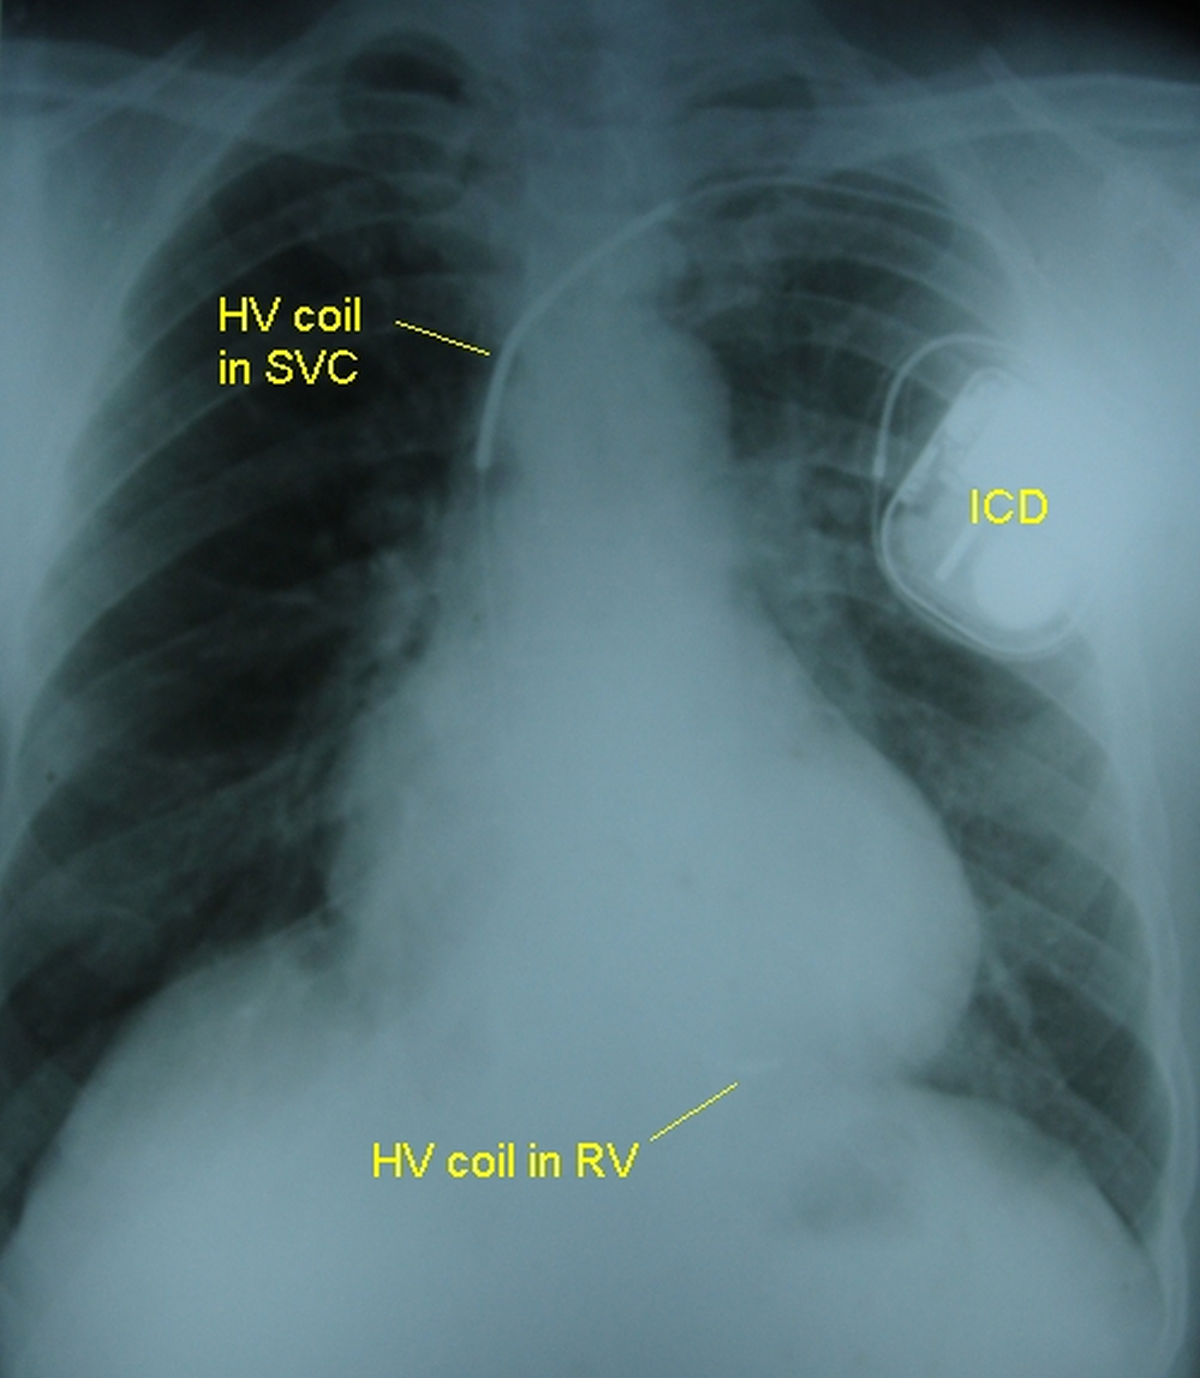 Implantable defibrillator high voltage coils on X-ray chest PA view - annotated